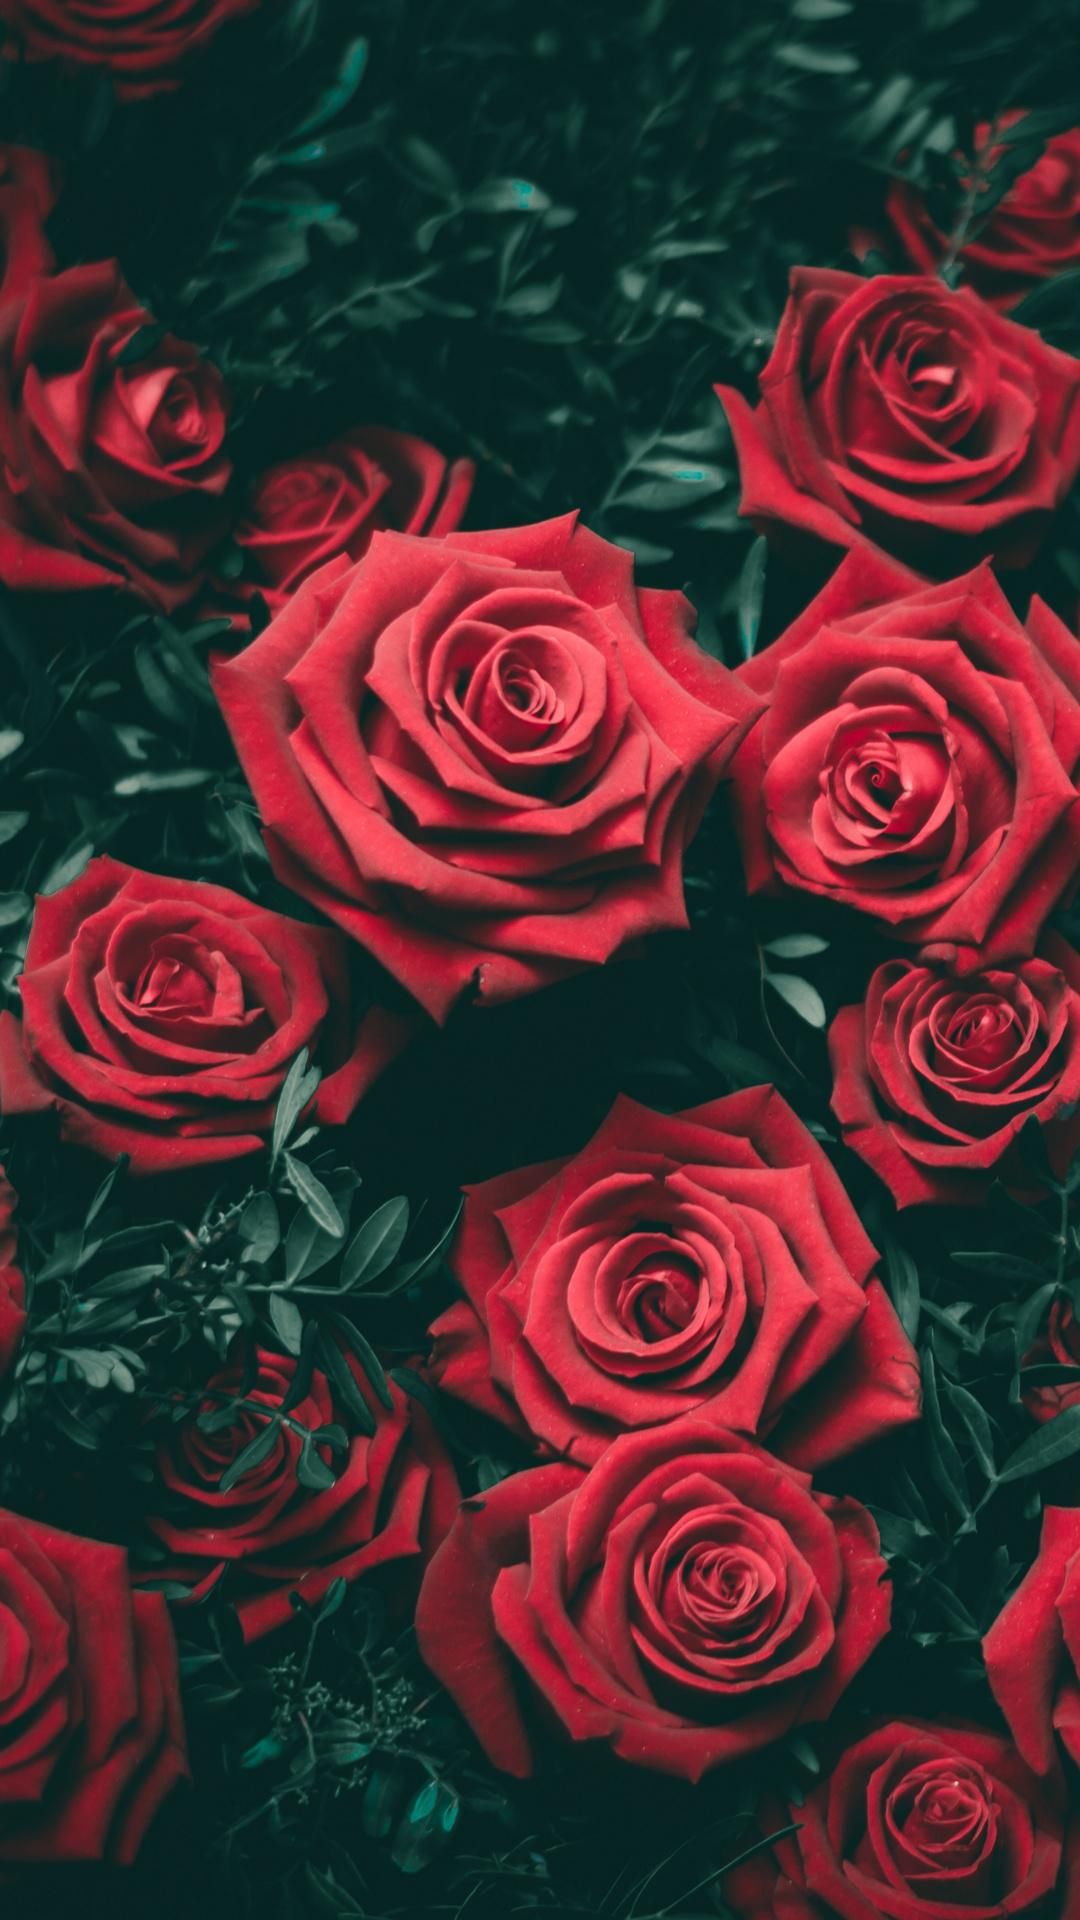 Red Roses. Flower iphone wallpaper, Red roses wallpaper, Rose wallpaper